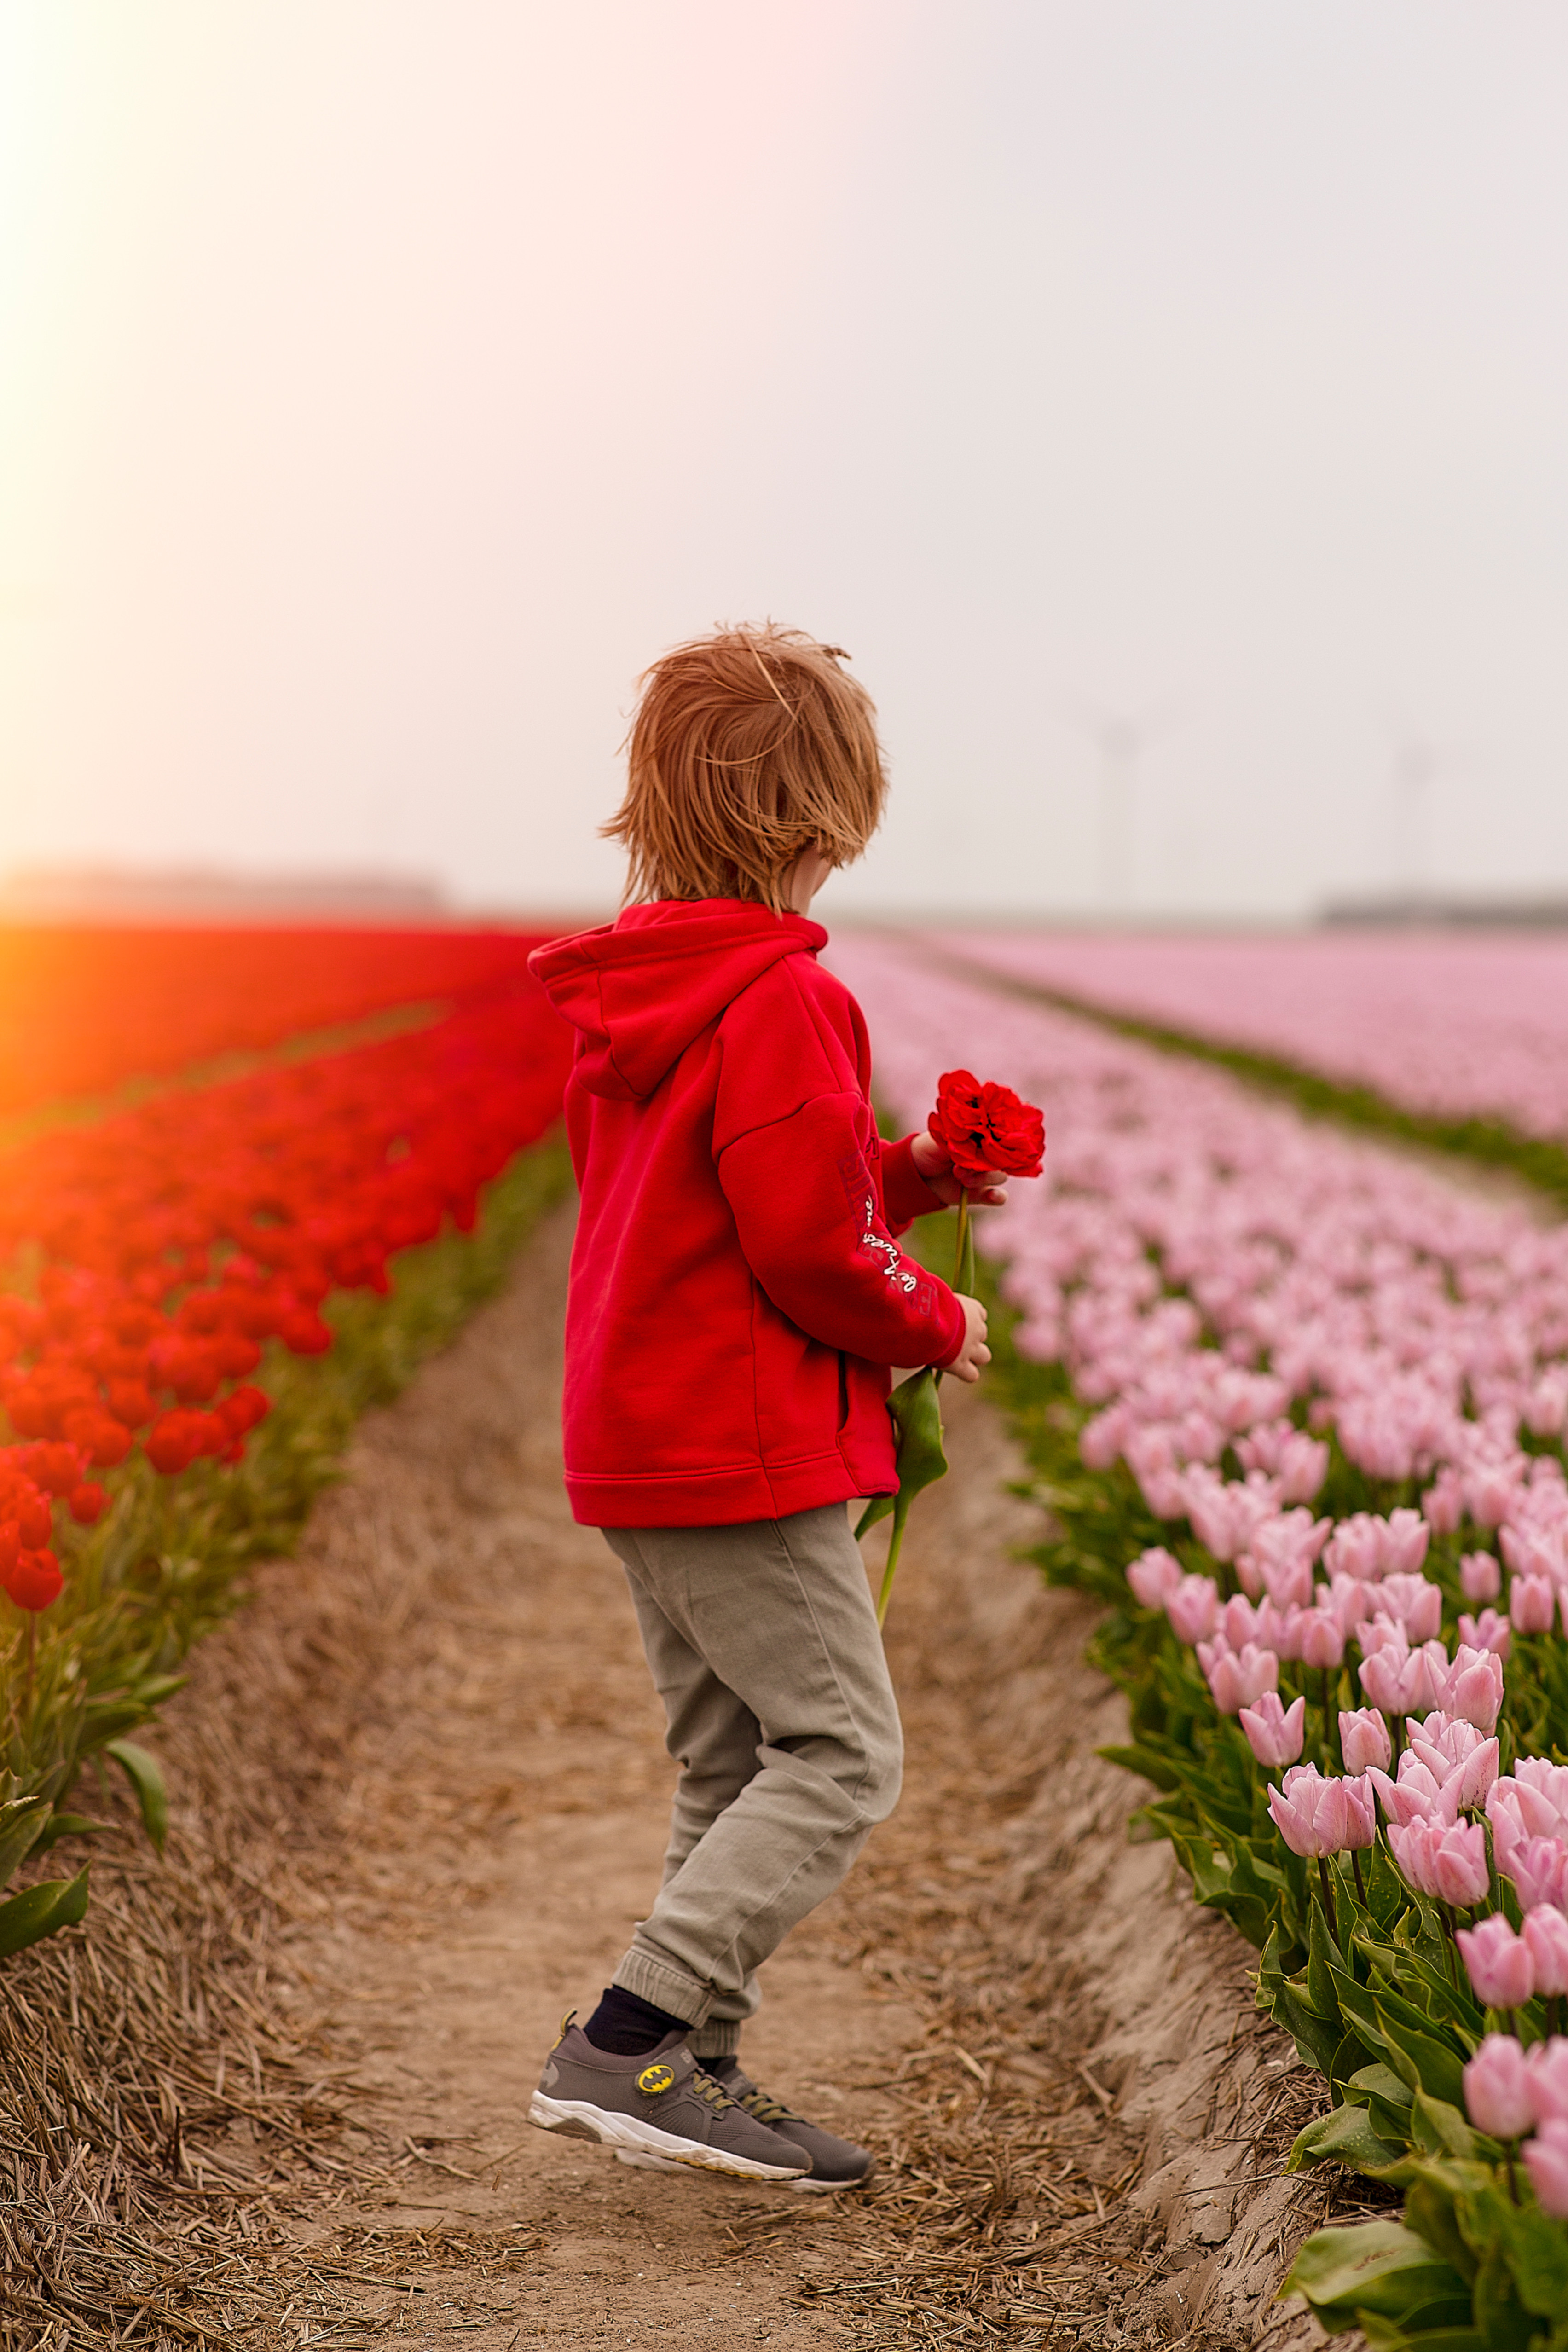 In the field of tulips